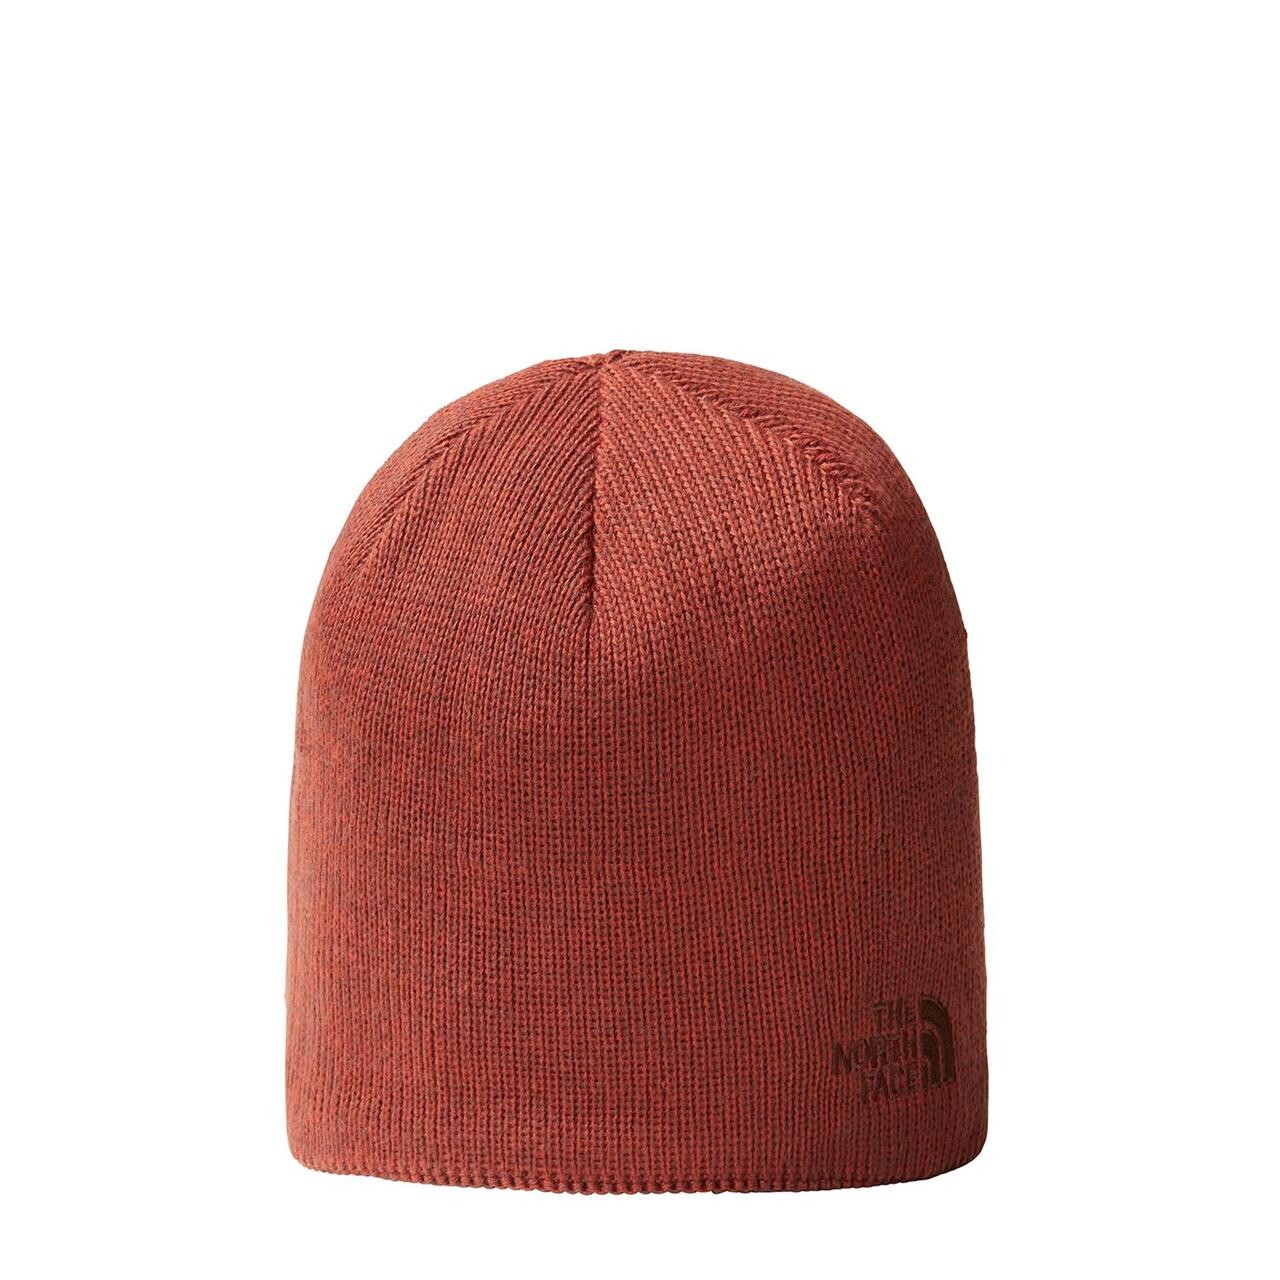 2: The North Face Bones Recycled Beanie (Brun (BRANDY BROWN HEATHER) One size)